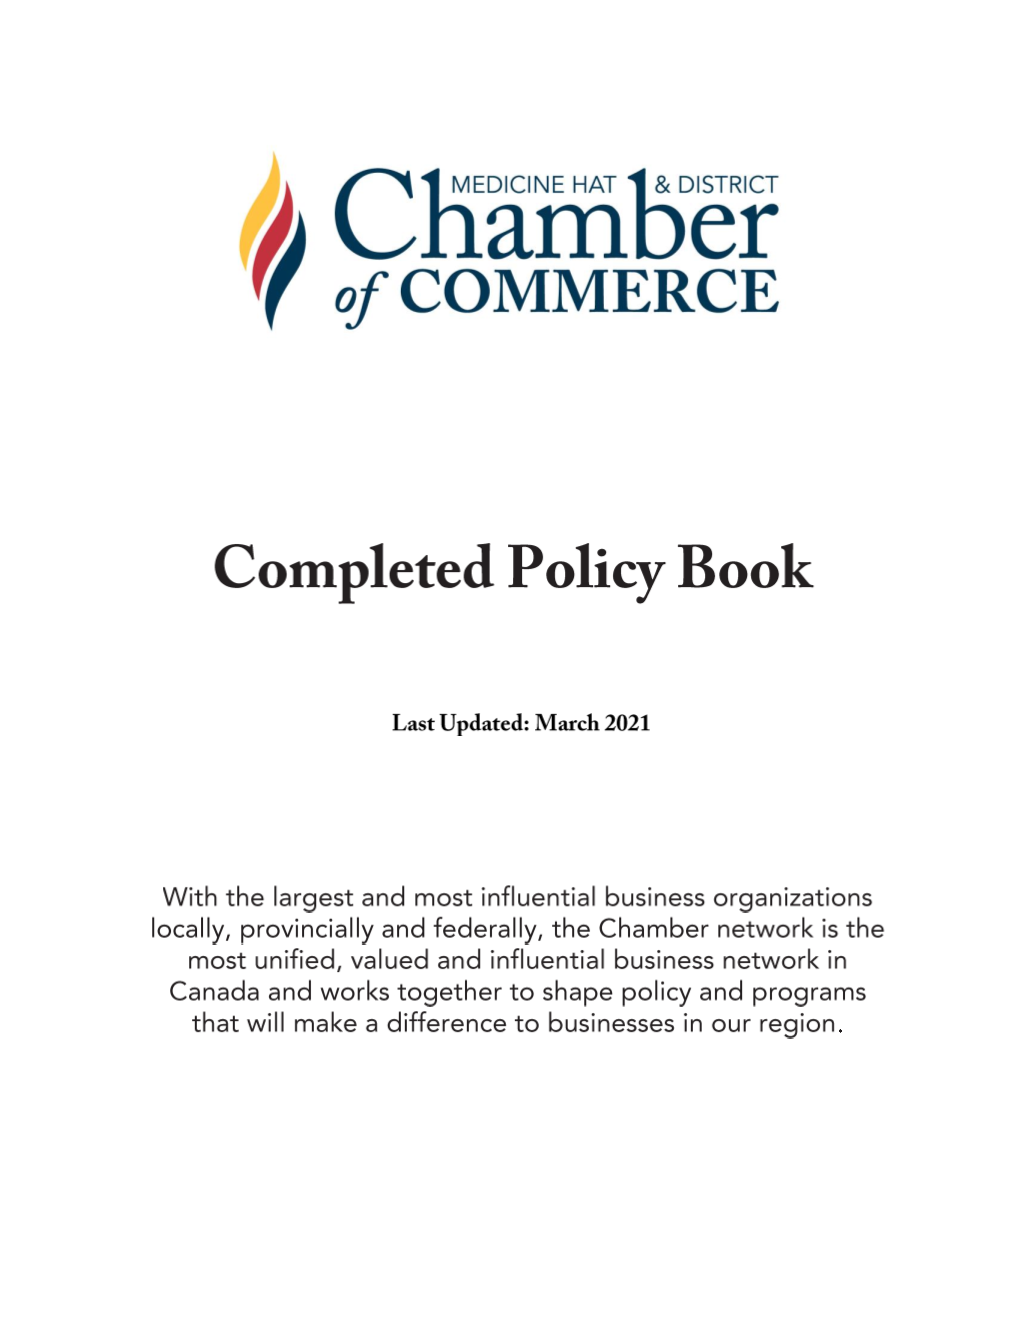 Medicine Hat & District Chamber of Commerce Policy Book